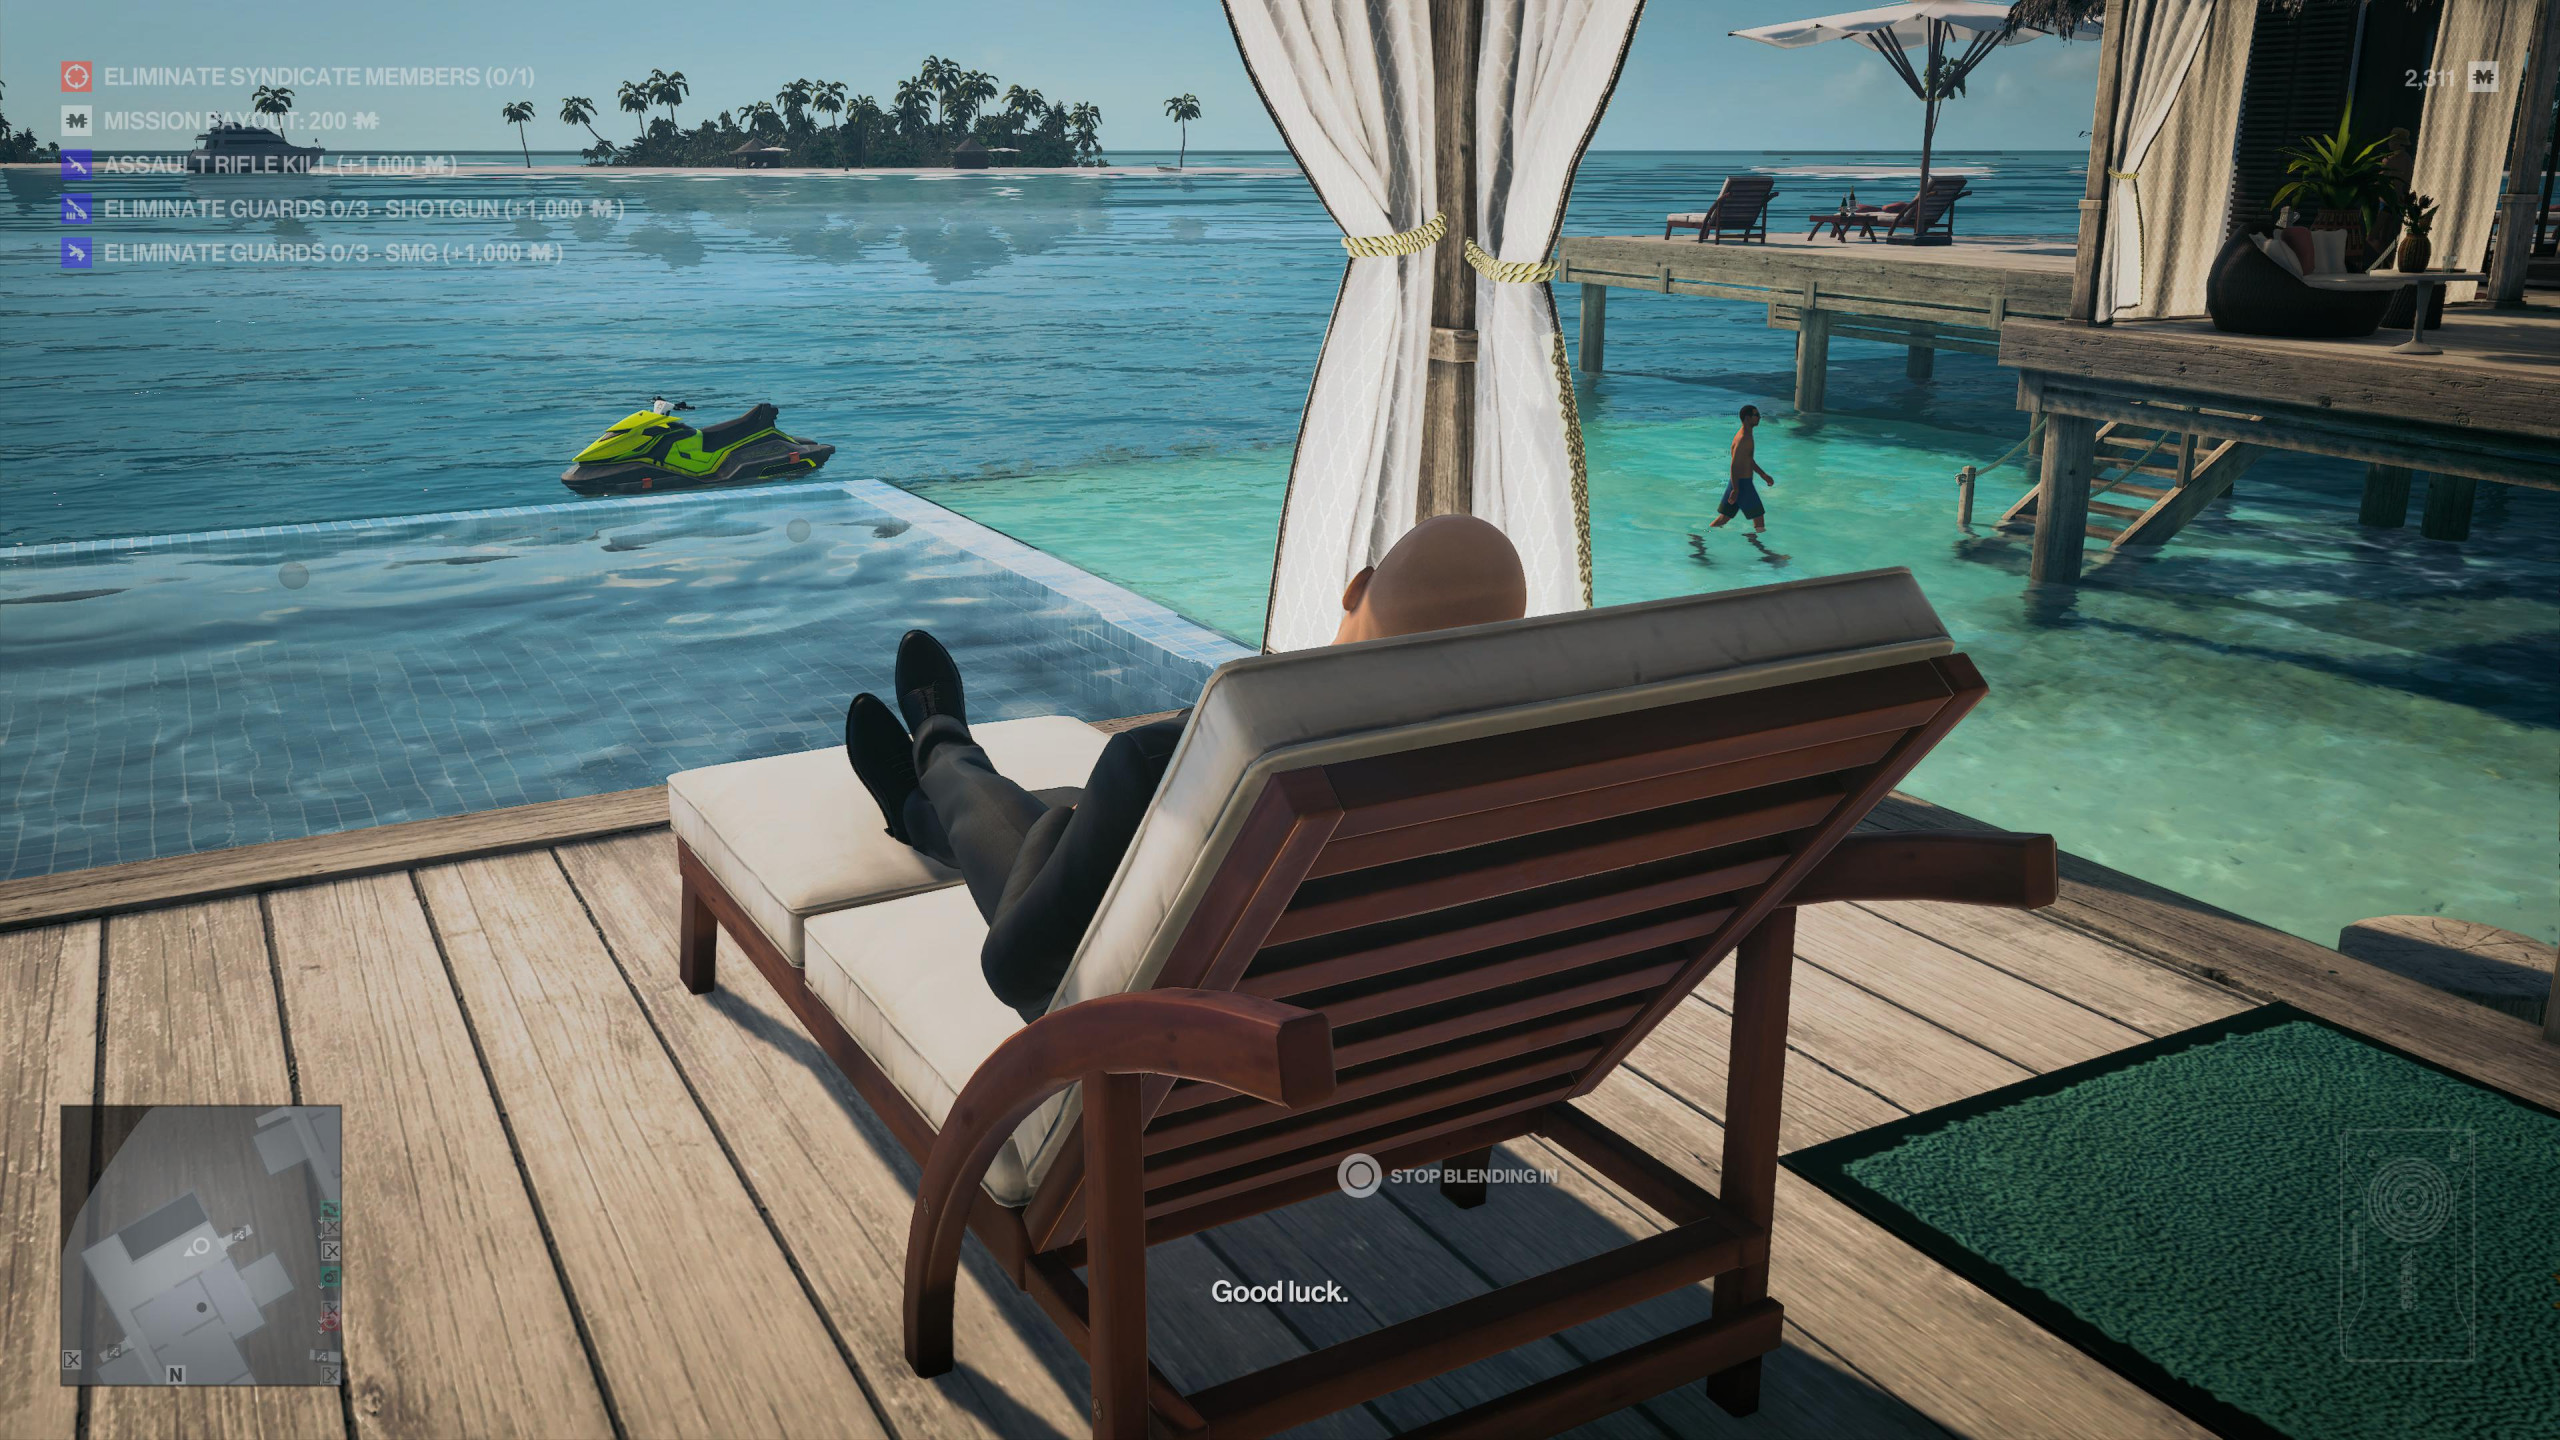 HITMAN Freelancer Review: Carve Your Own Path (PS5) - KeenGamer